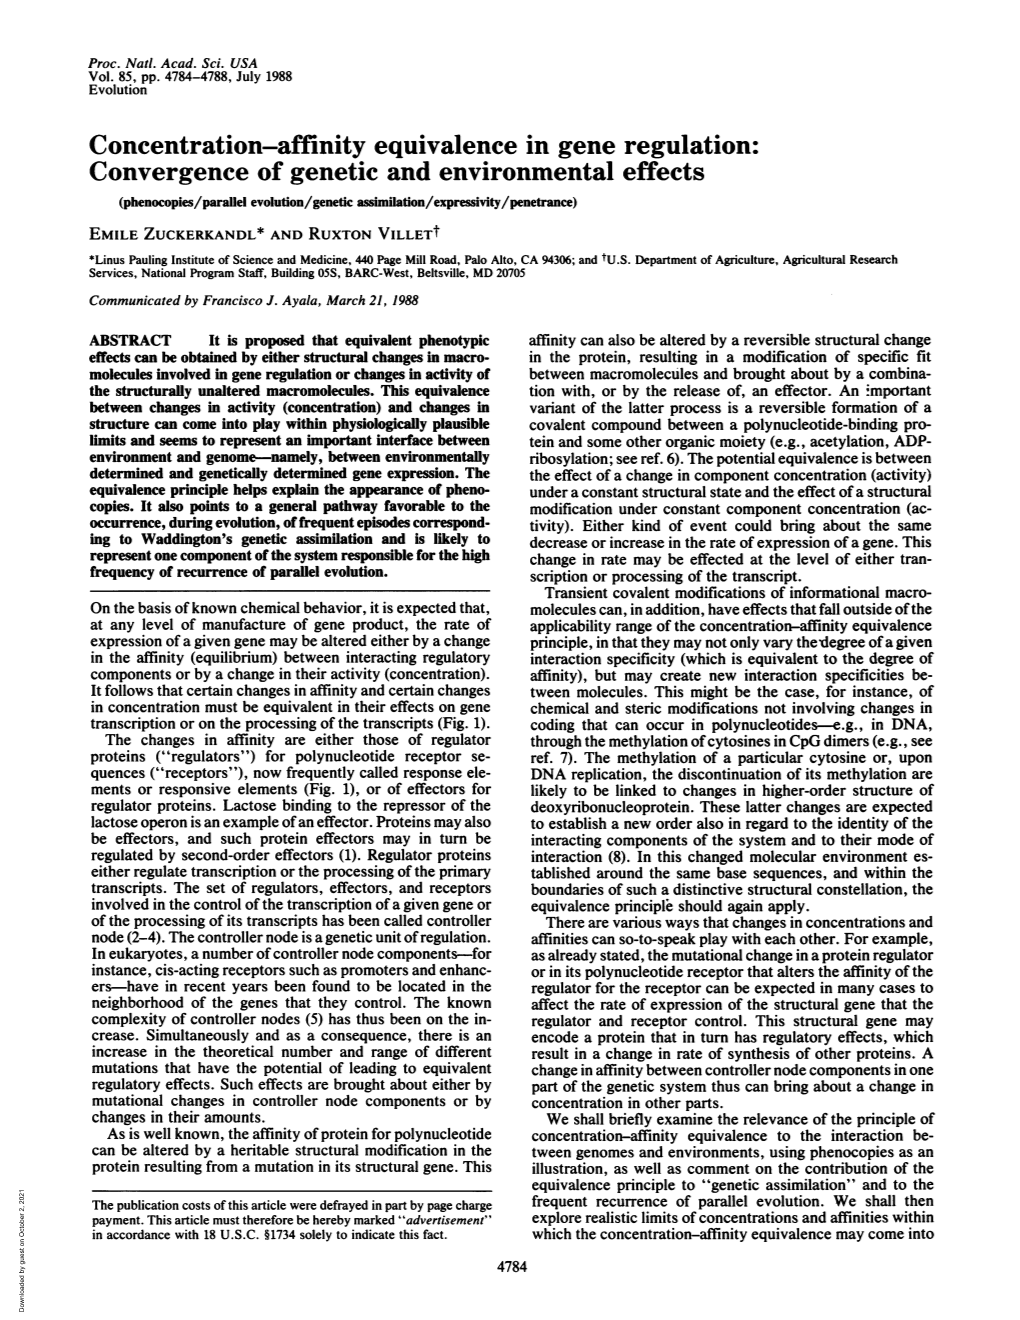 Concentration-Affinity Equivalence in Gene Regulation: Convergence Of